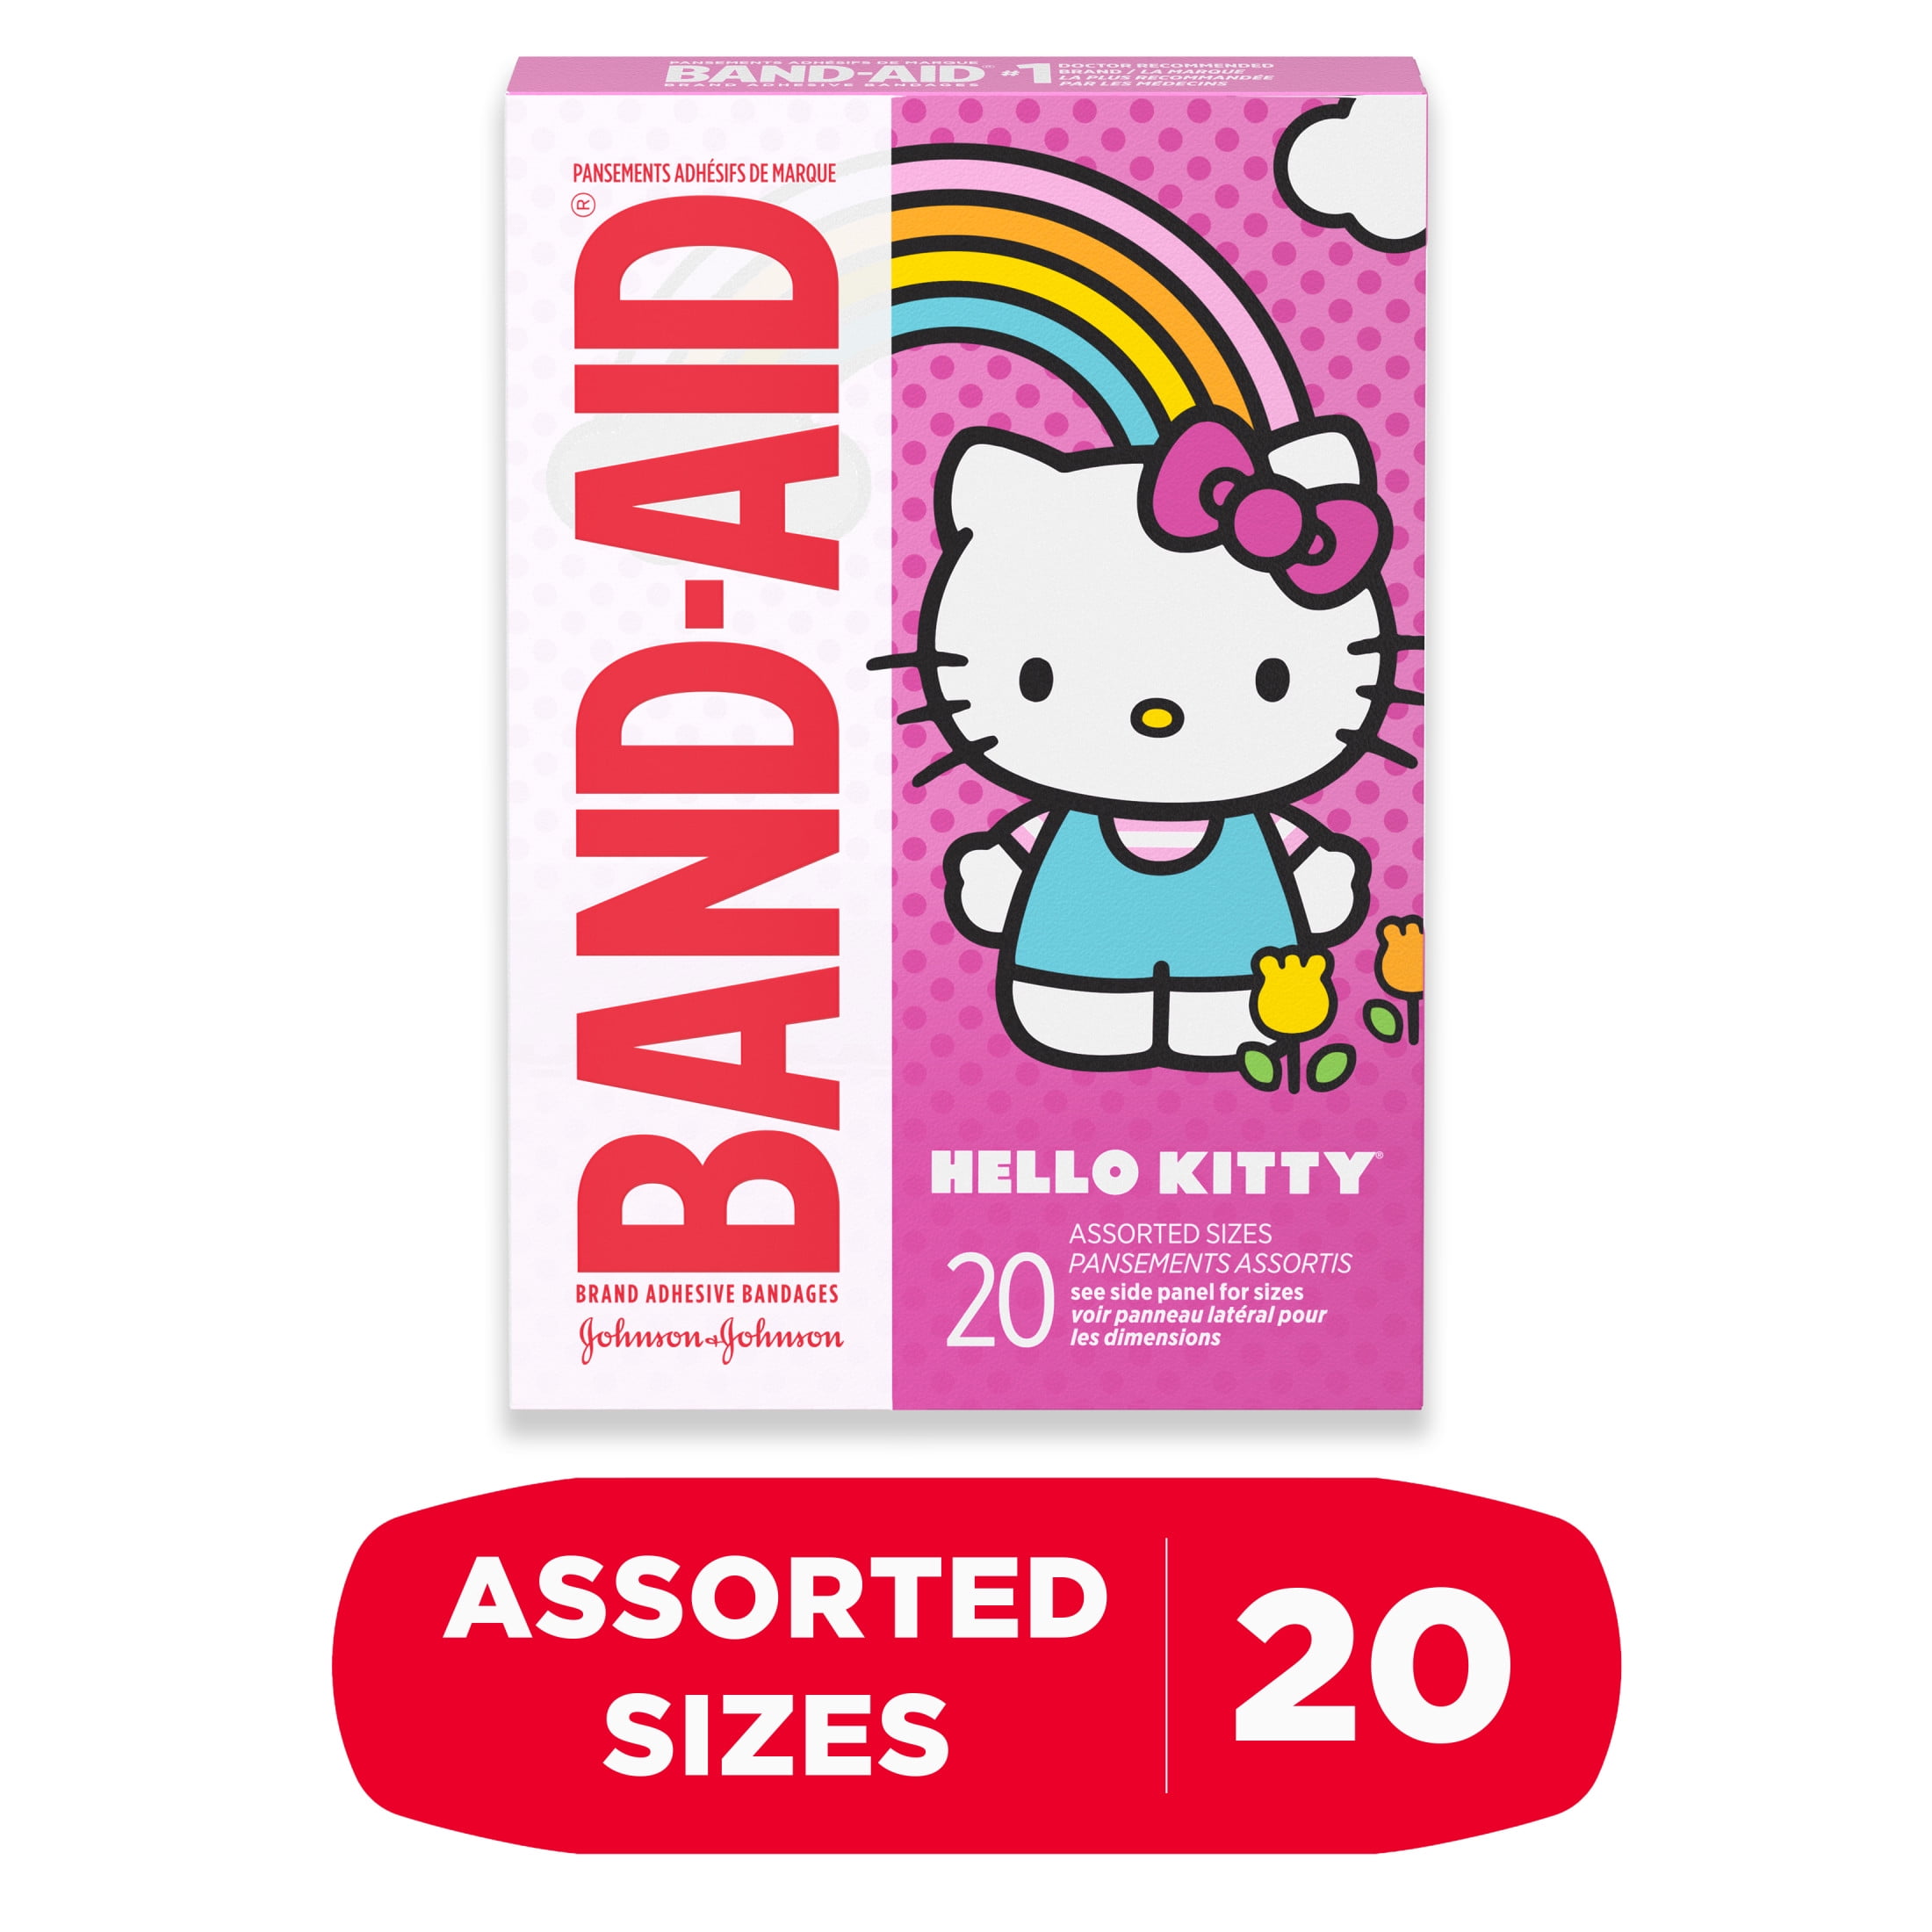 Band-Aid Adhesive Bandages, Hello Kitty, Assorted Sizes 20Ct 